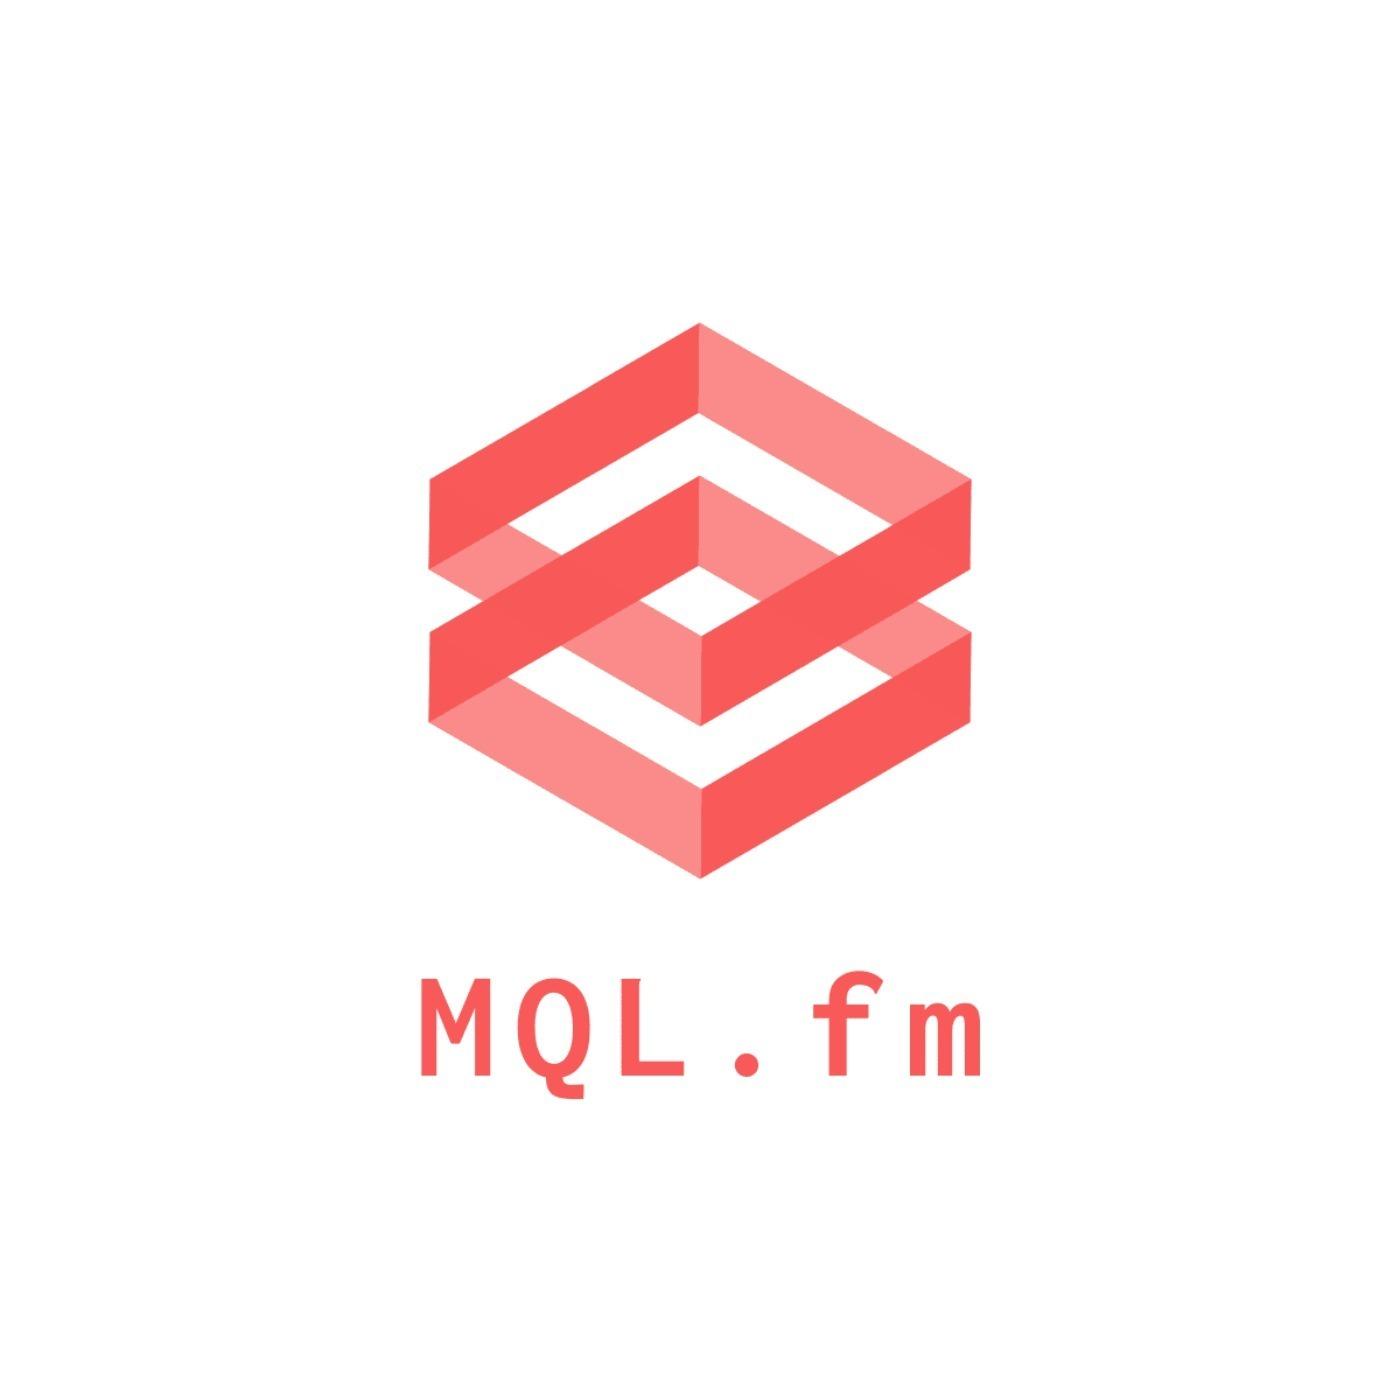 MQL.fm - Marketing Operations with Jacques Corby-Tuech